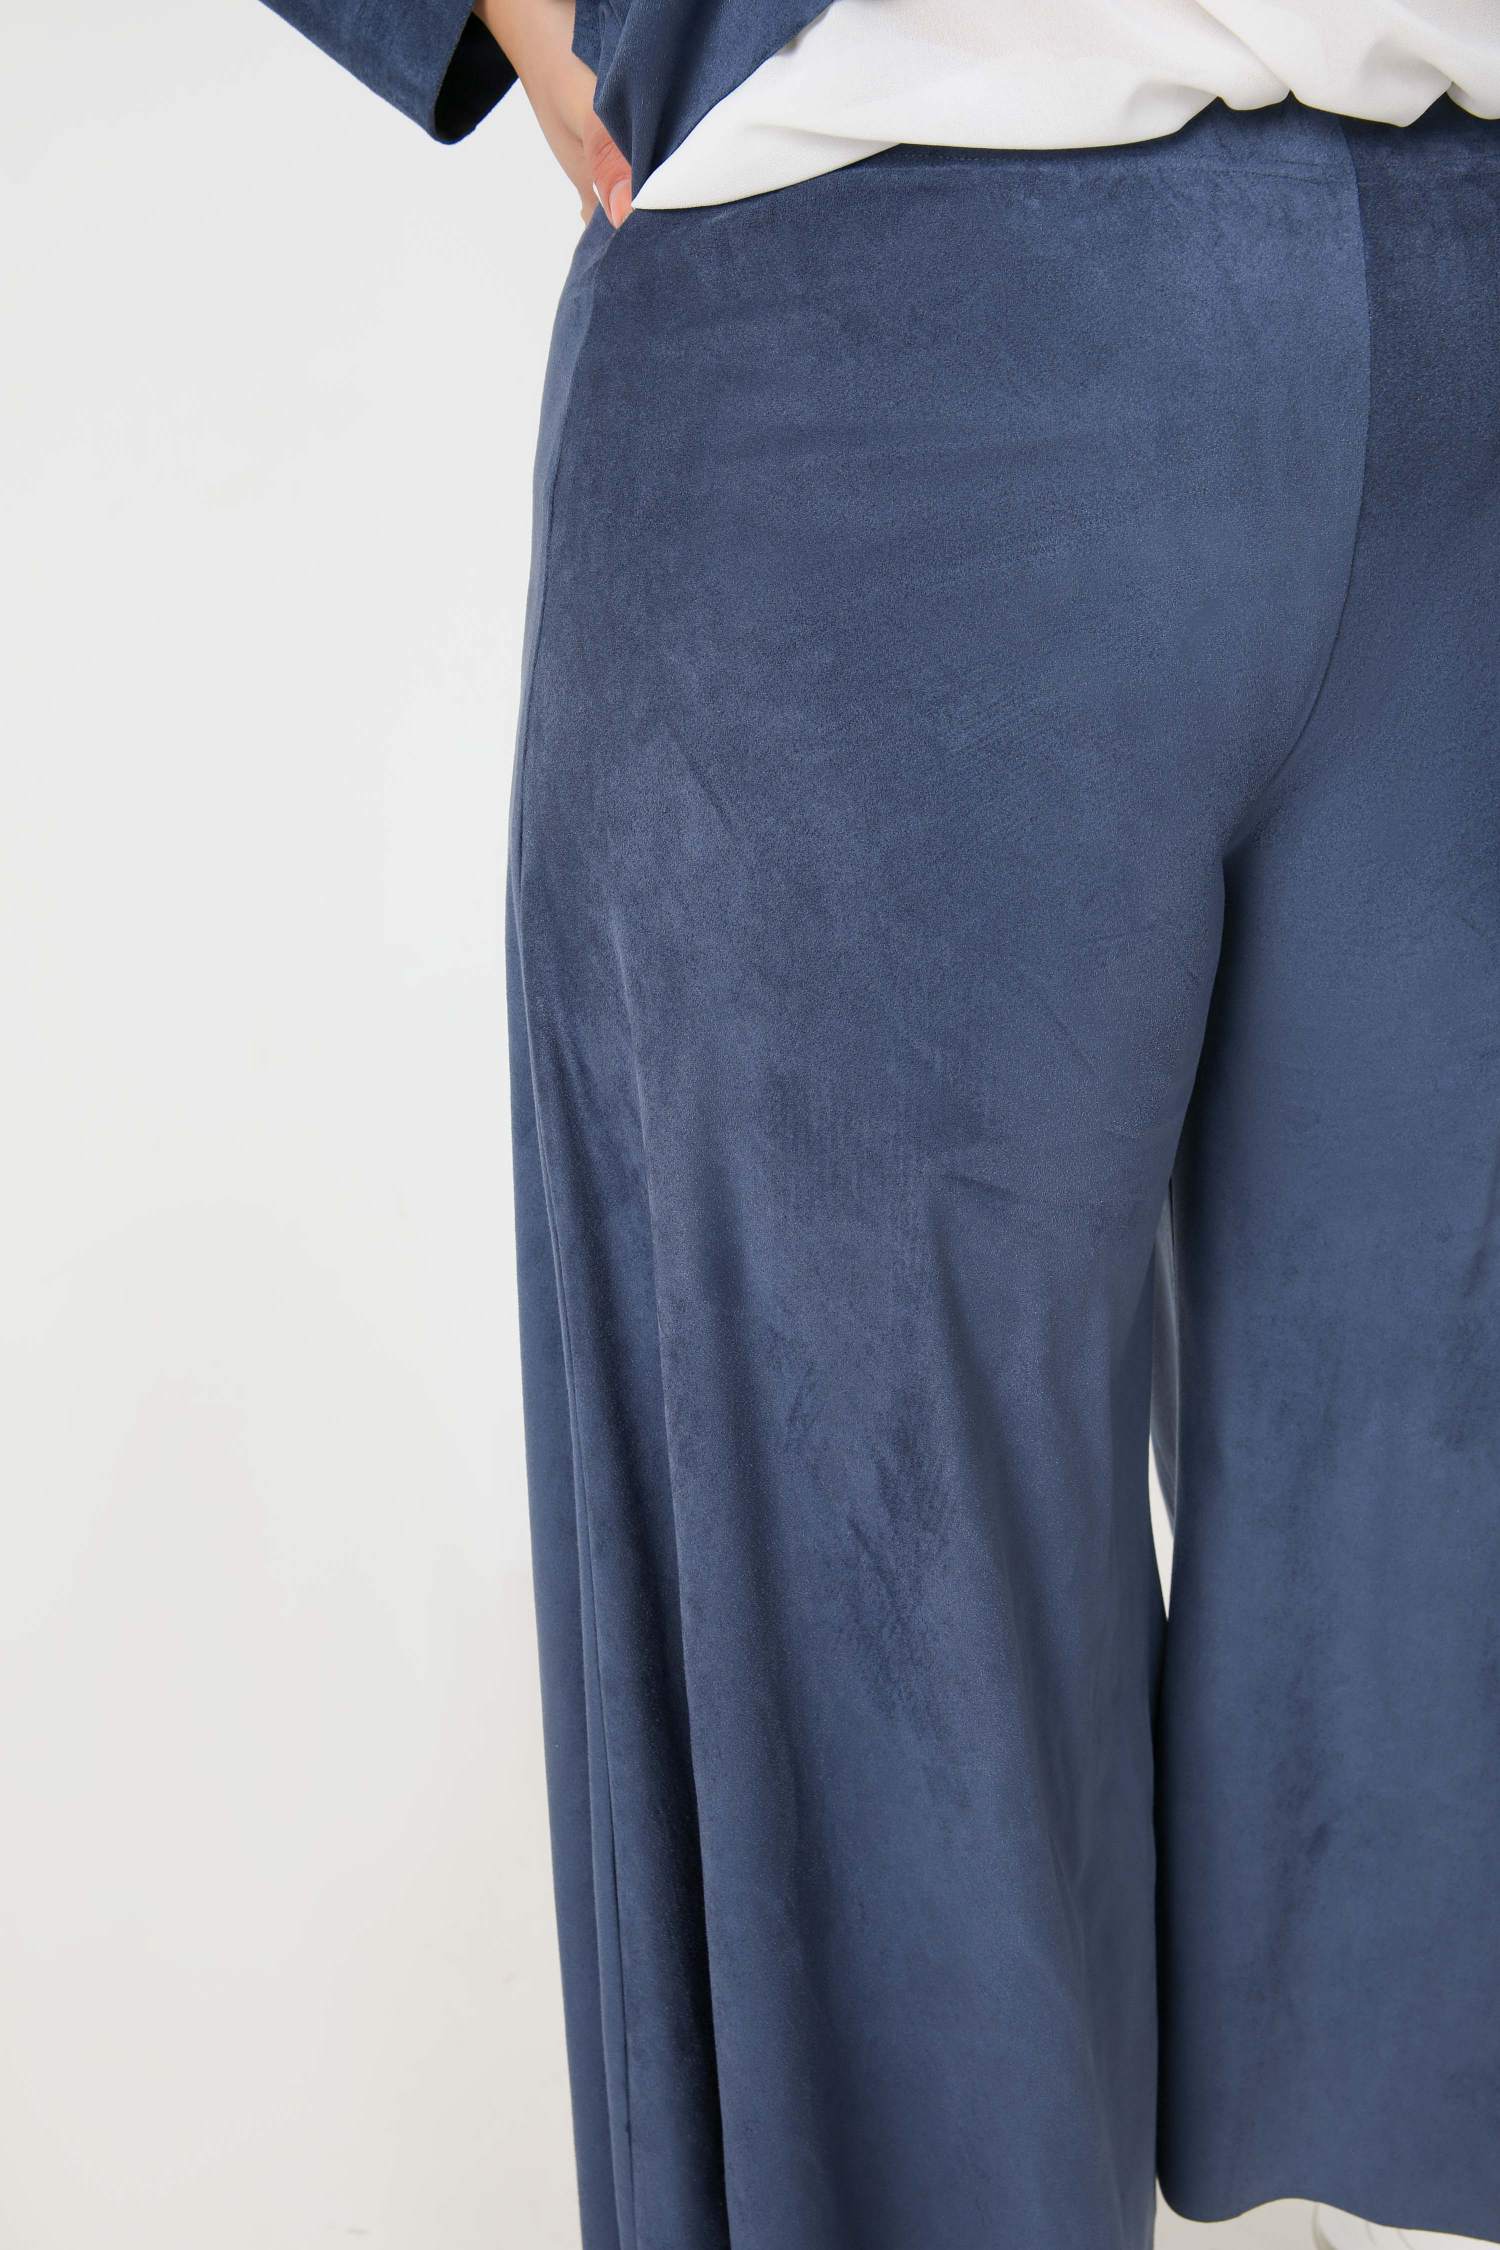 Suede effect culotte pants (shipping January 25/31)